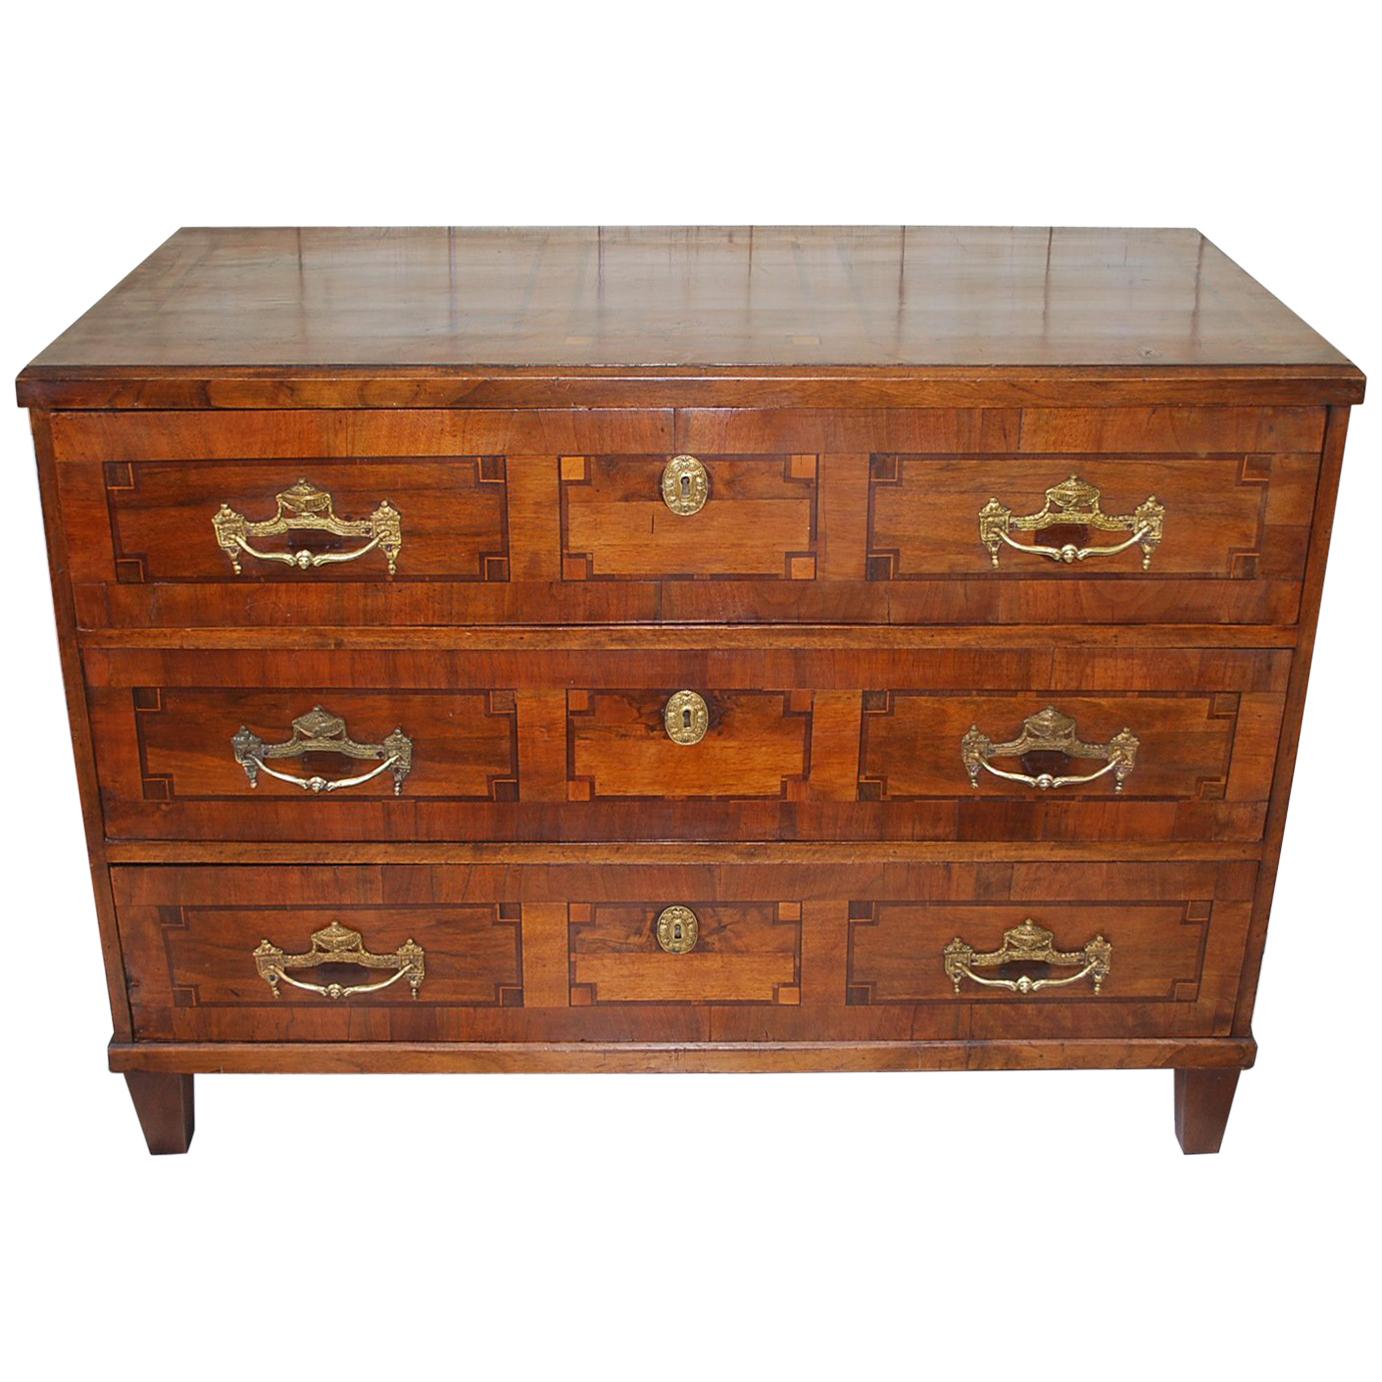 Antique German Walnut and inlaid Commode/ Chest of Drawers Circa 1830 For Sale